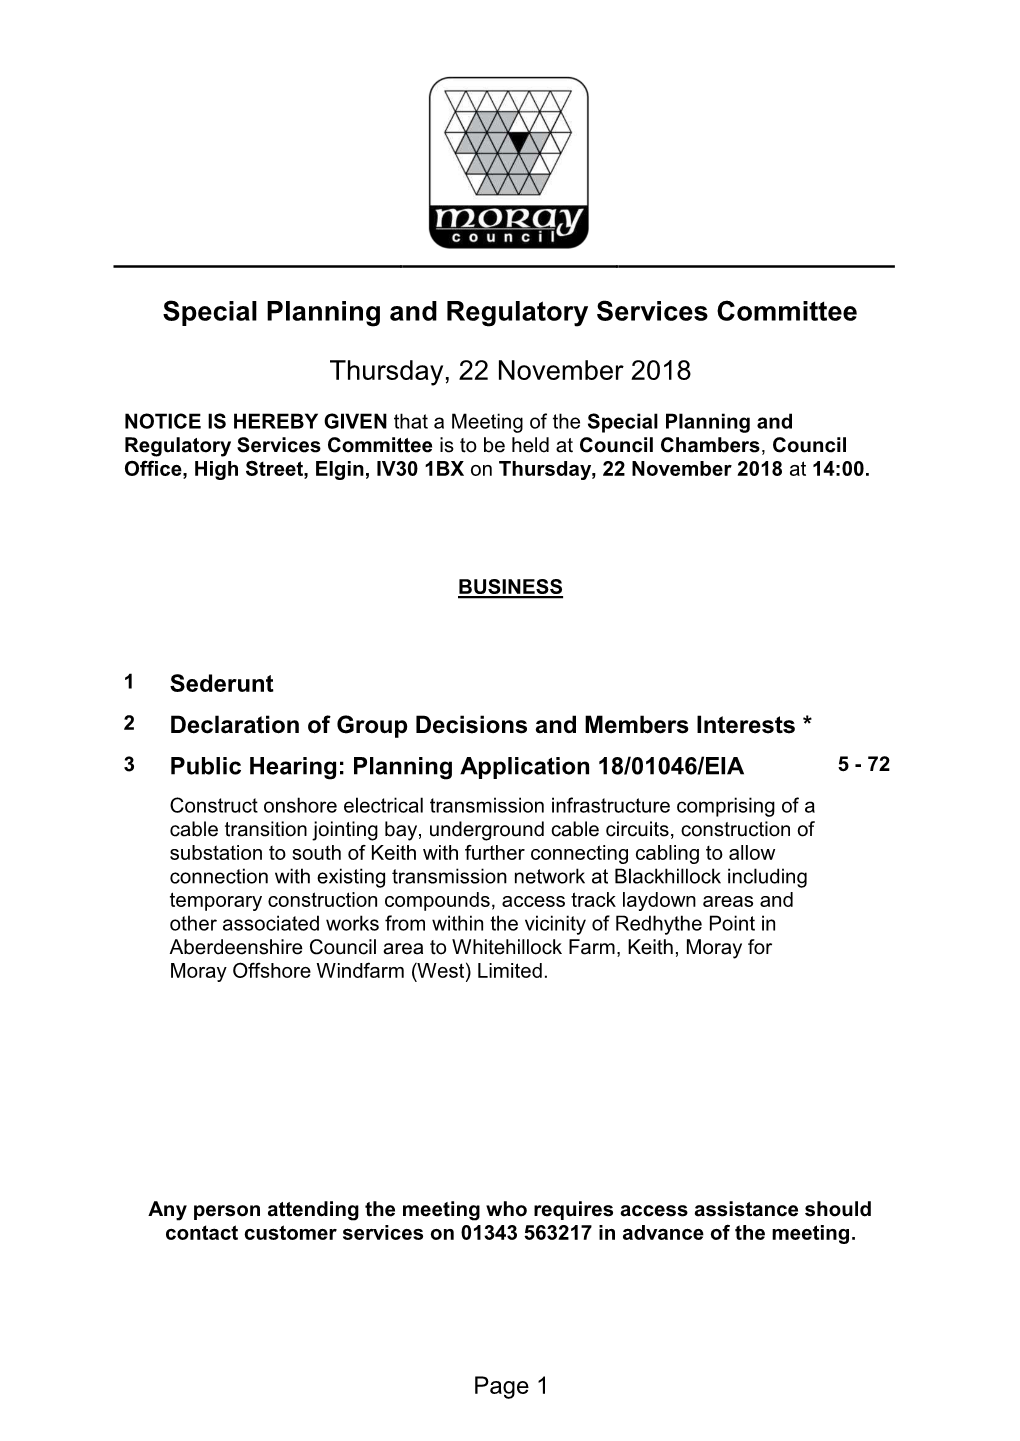 Special Planning and Regulatory Services Committee Thursday, 22